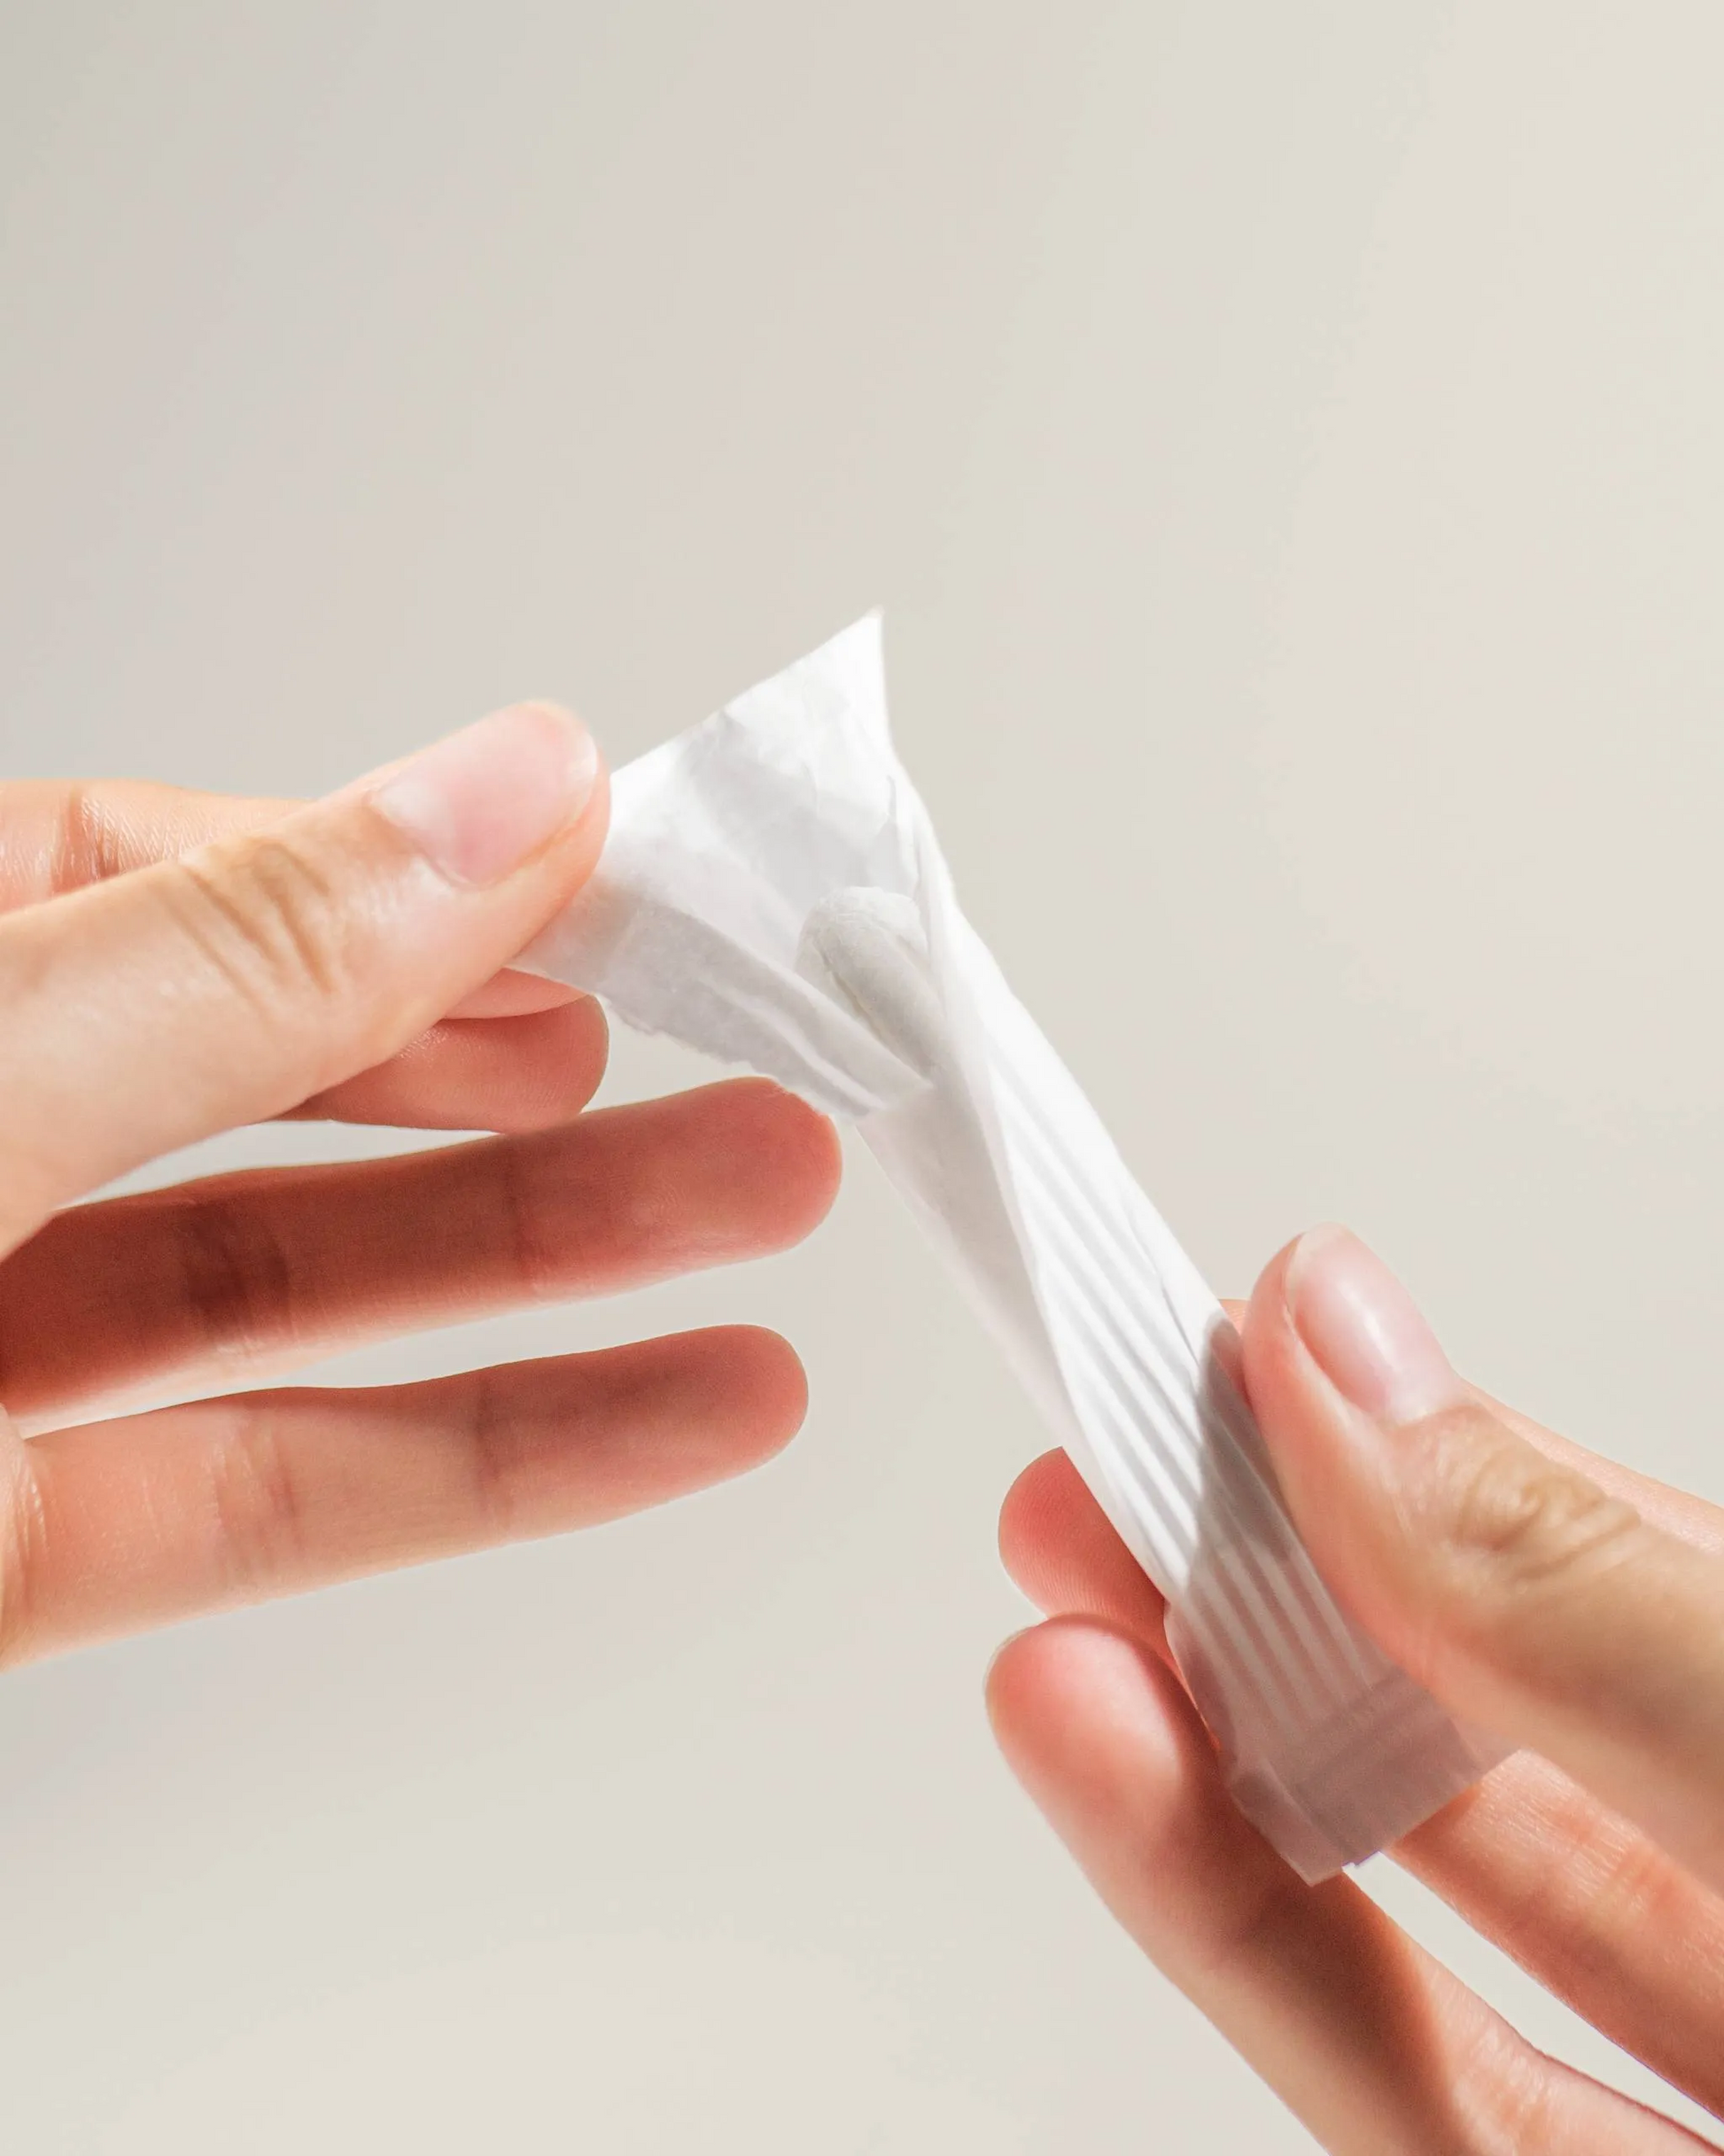 Image of hands unwrapping organic cotton non-applicator tampon